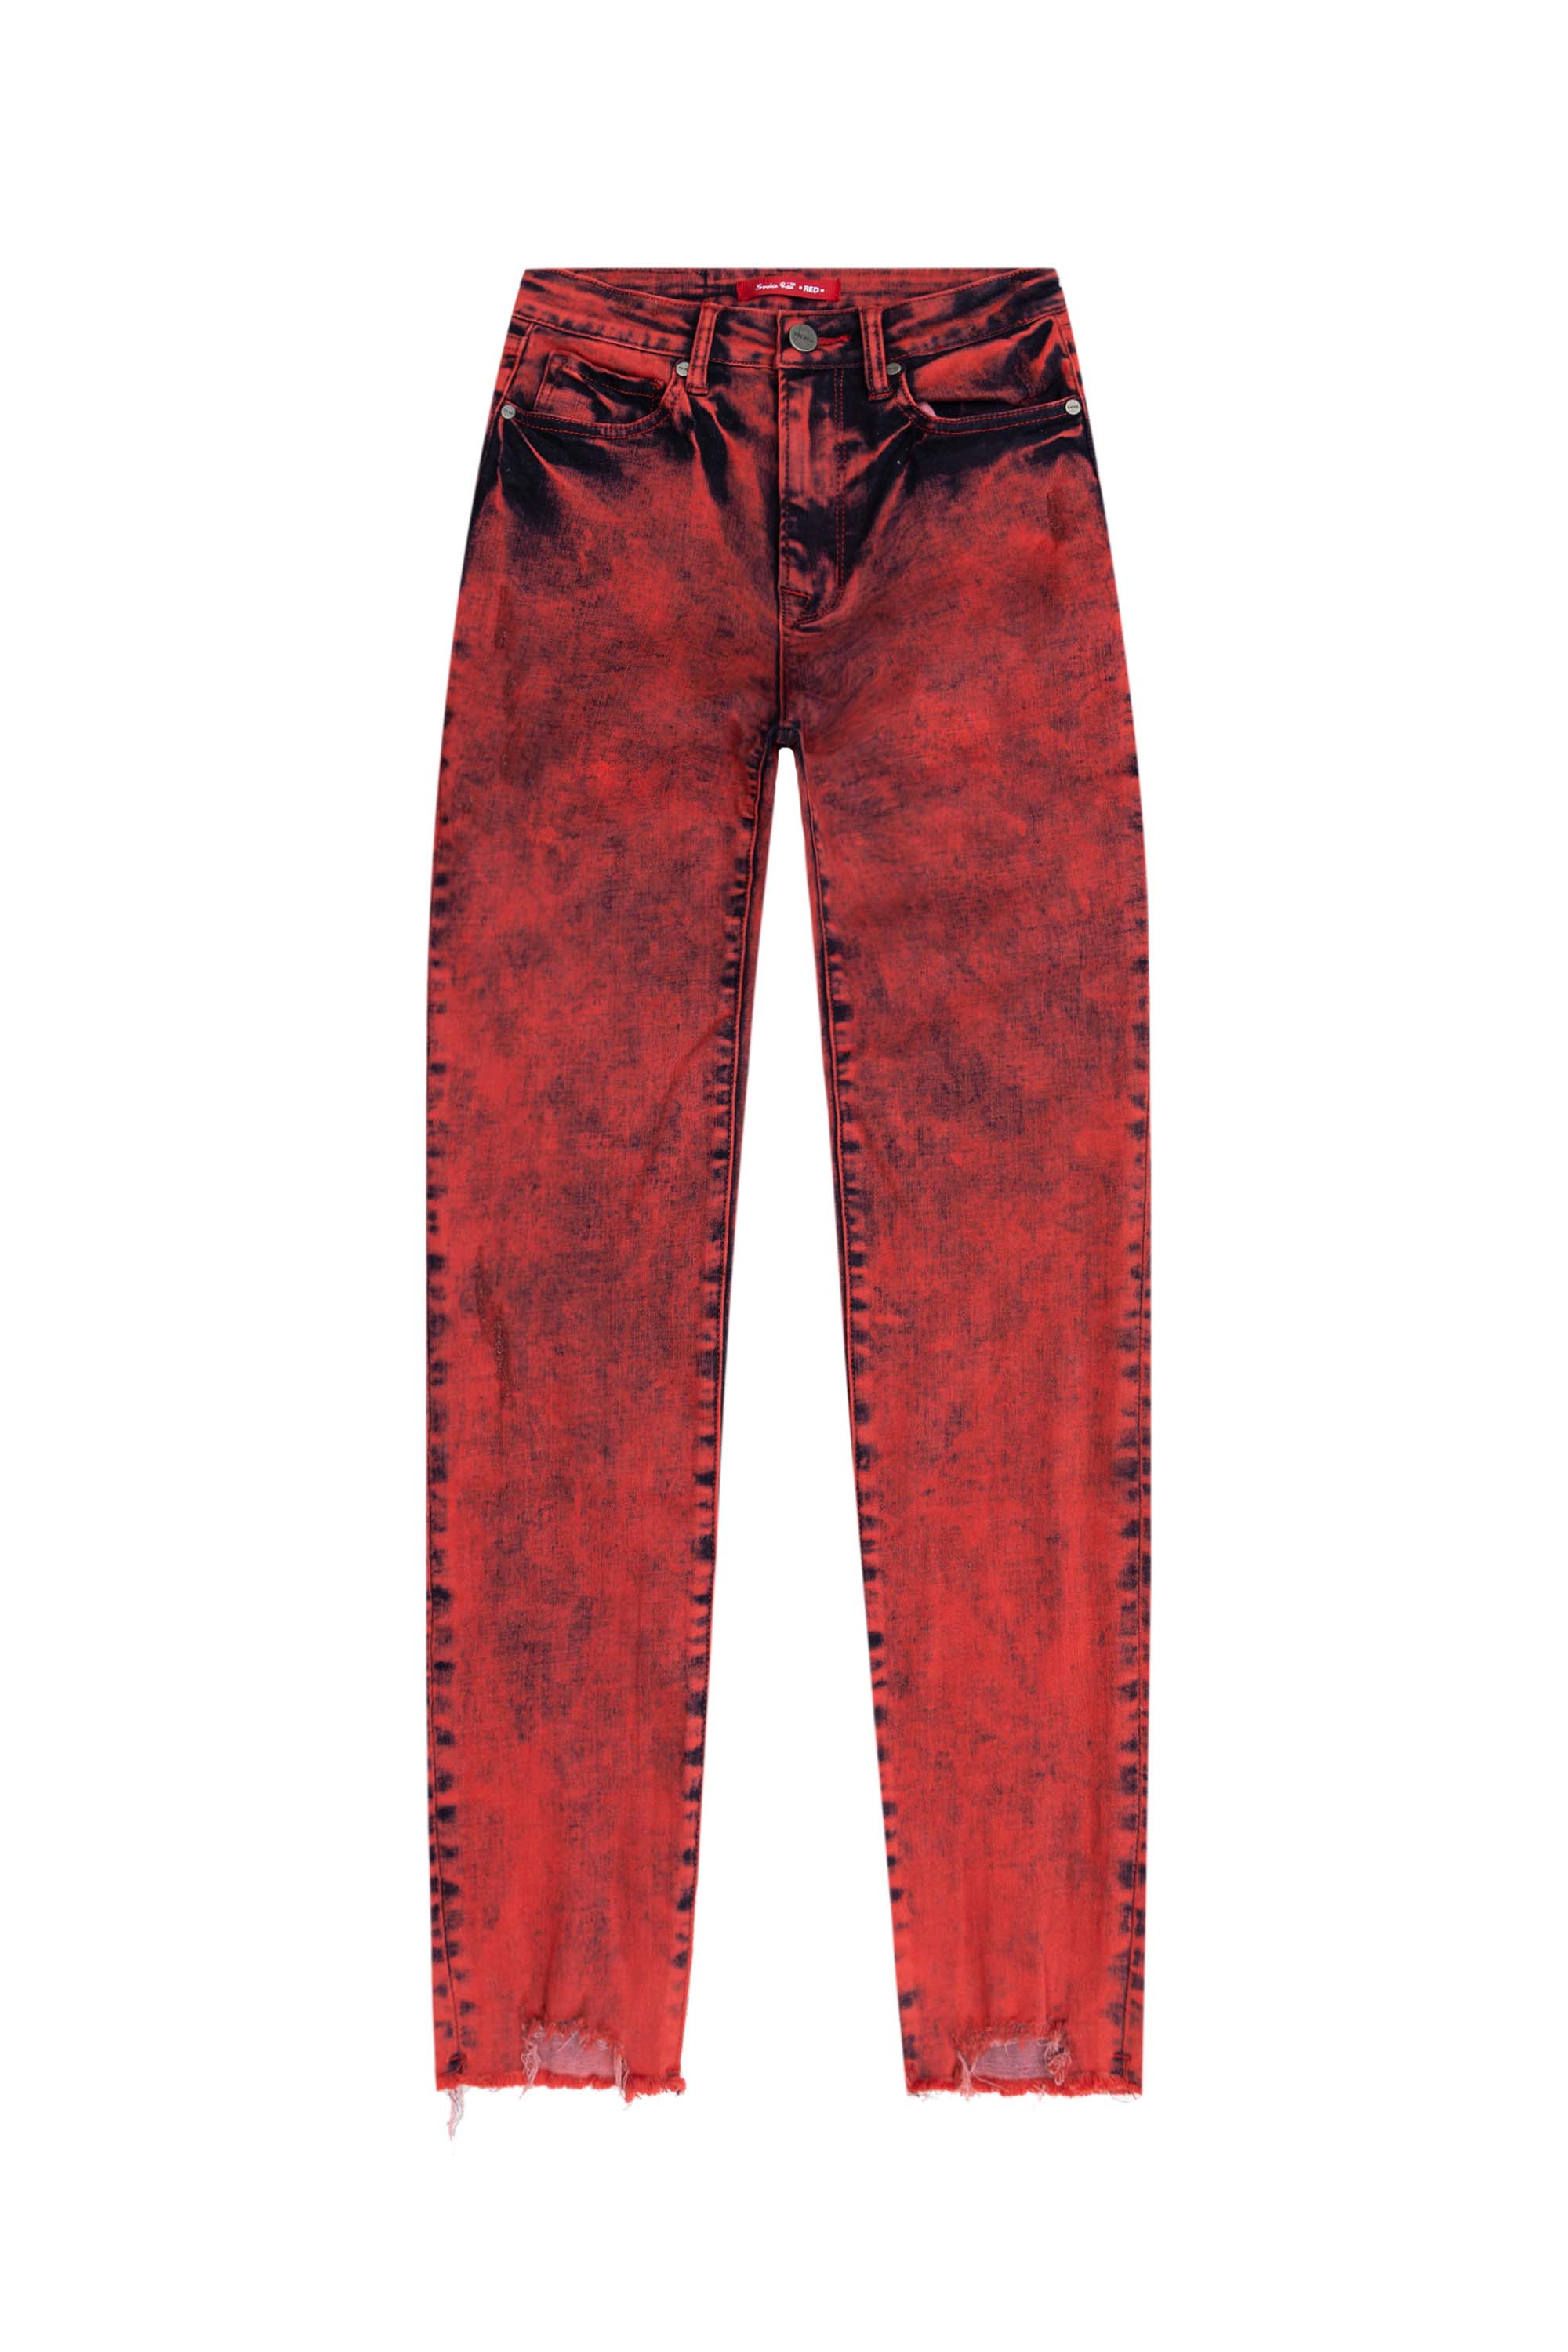 Over Dyed Fashion Denim Pants